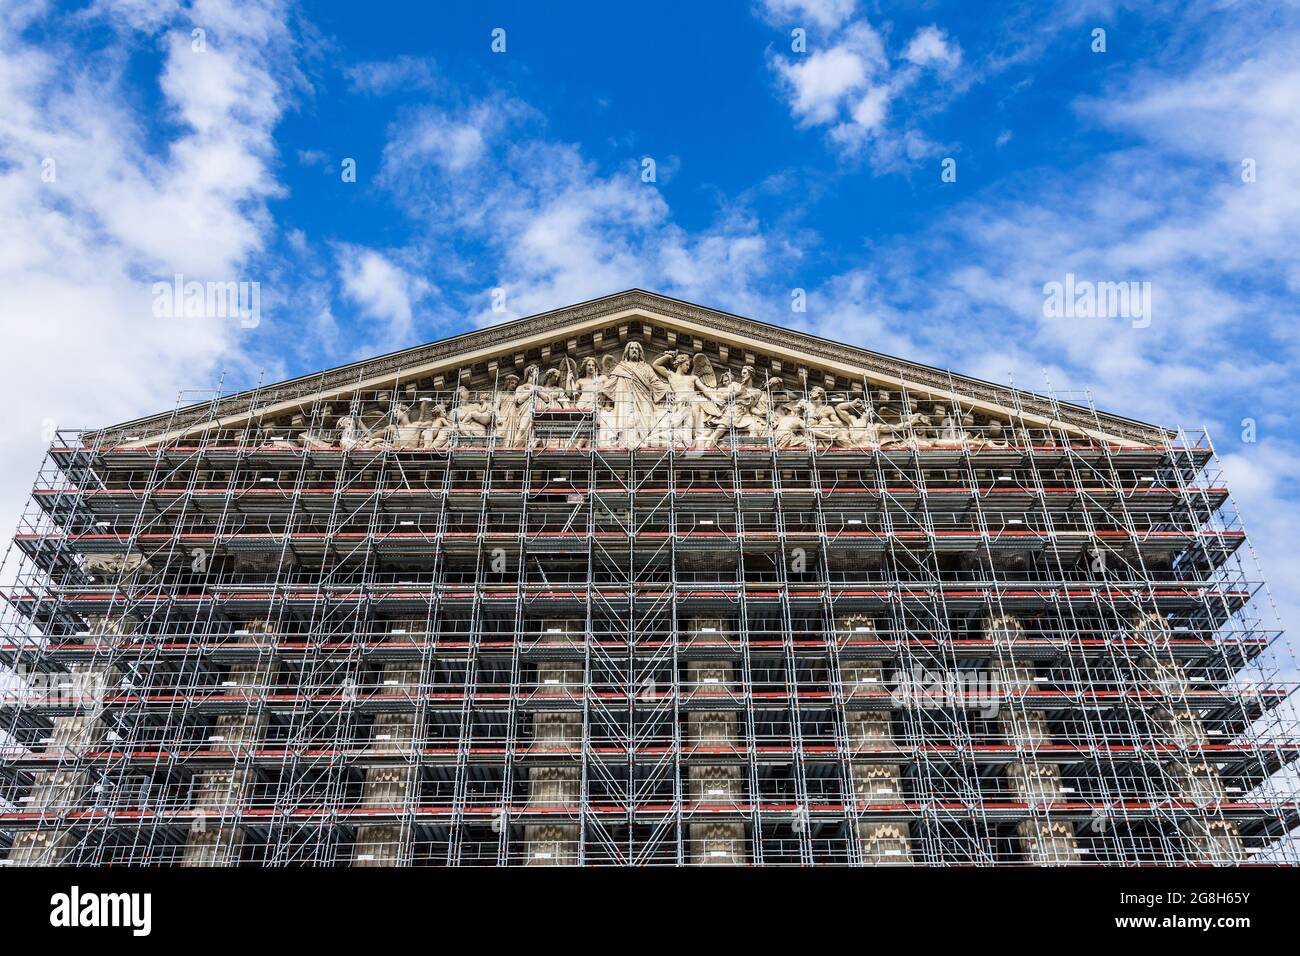 La Madeleine church enveloped in scaffolding for major renovation and cleaning - Paris, France. Stock Photo